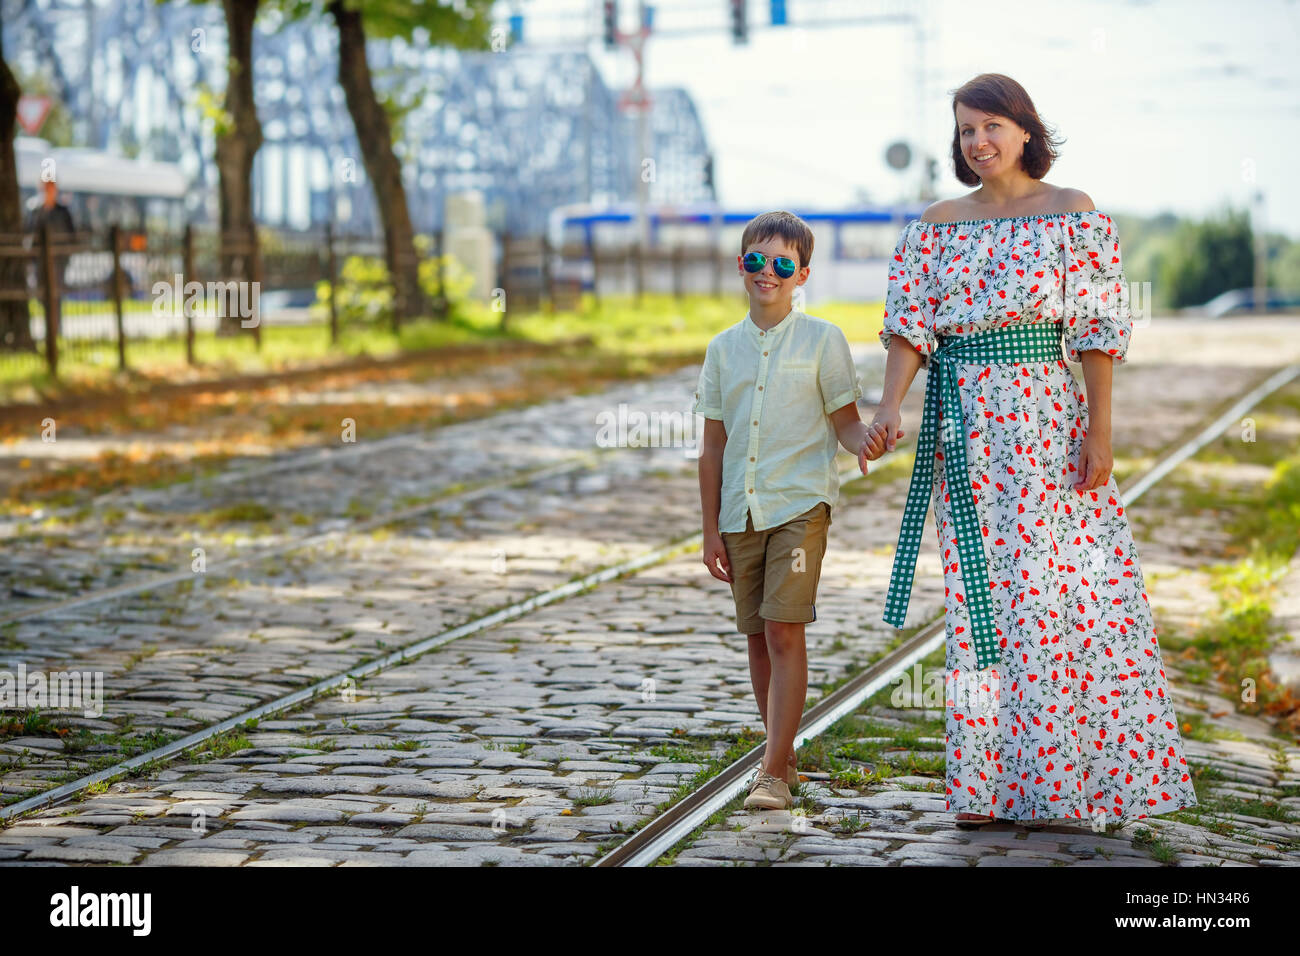 Young mother and her son walking outdoors in city Stock Photo